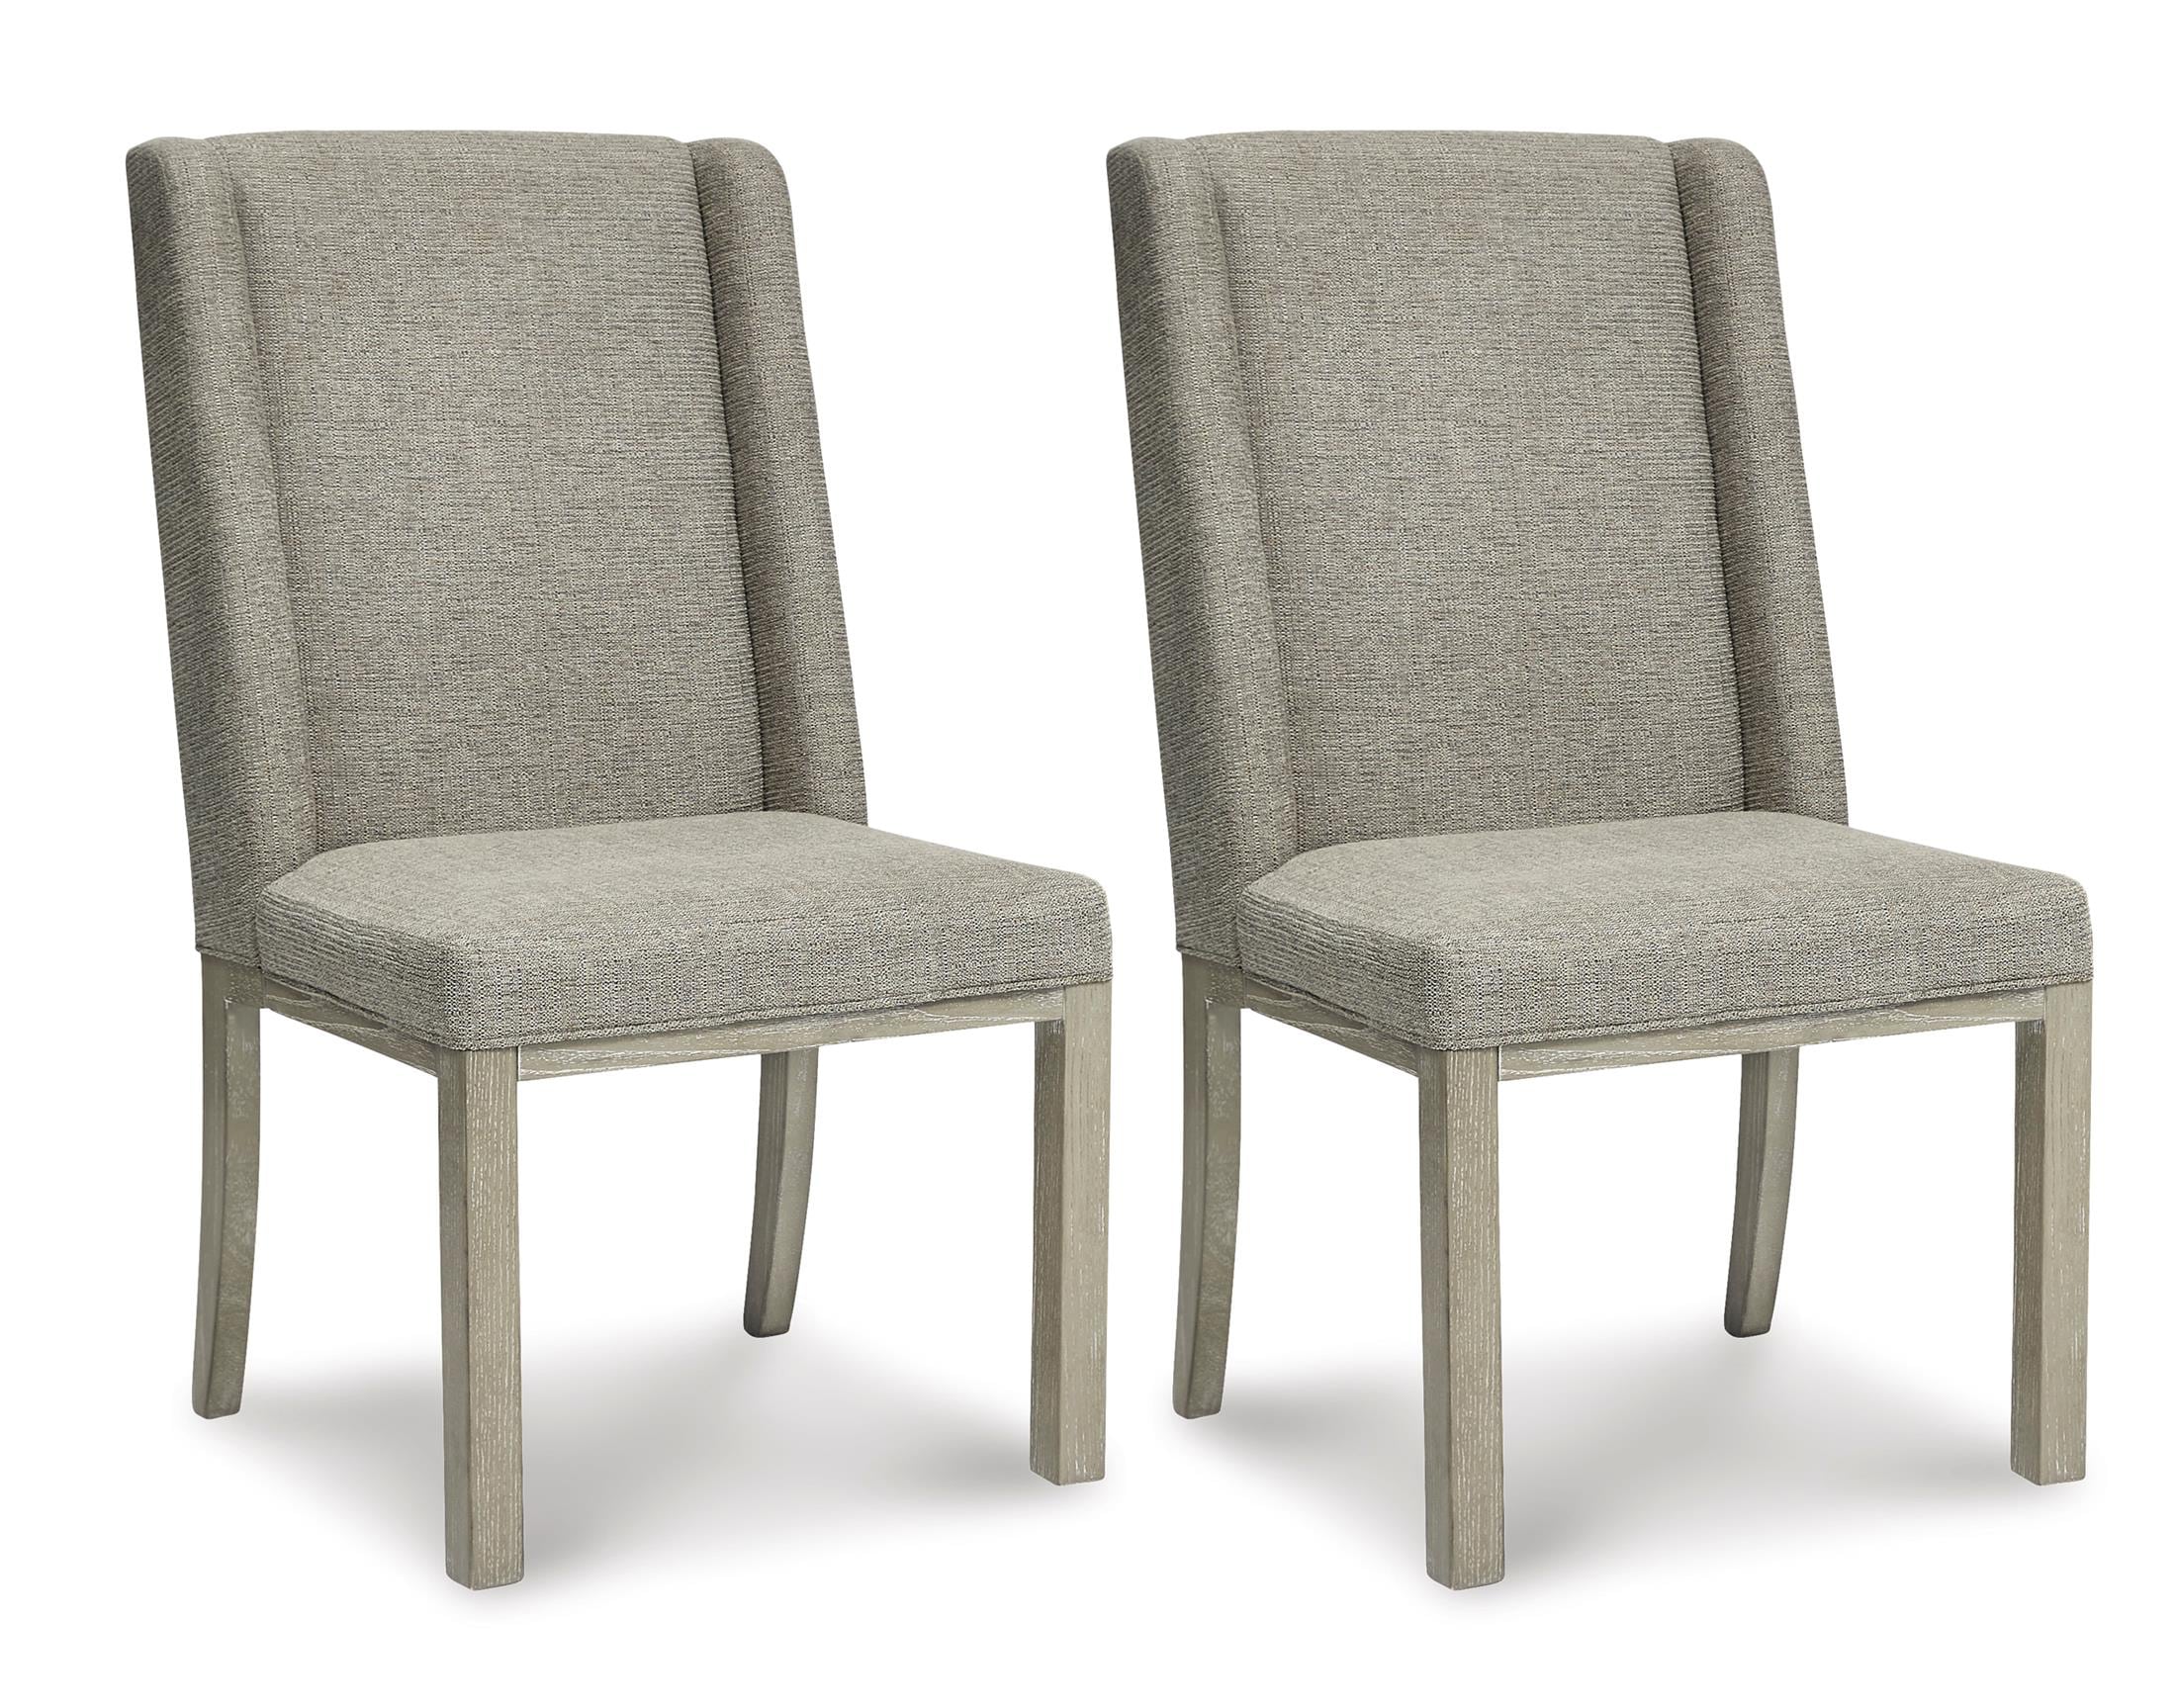 Fawnburg Dining Chair (Set of 2)